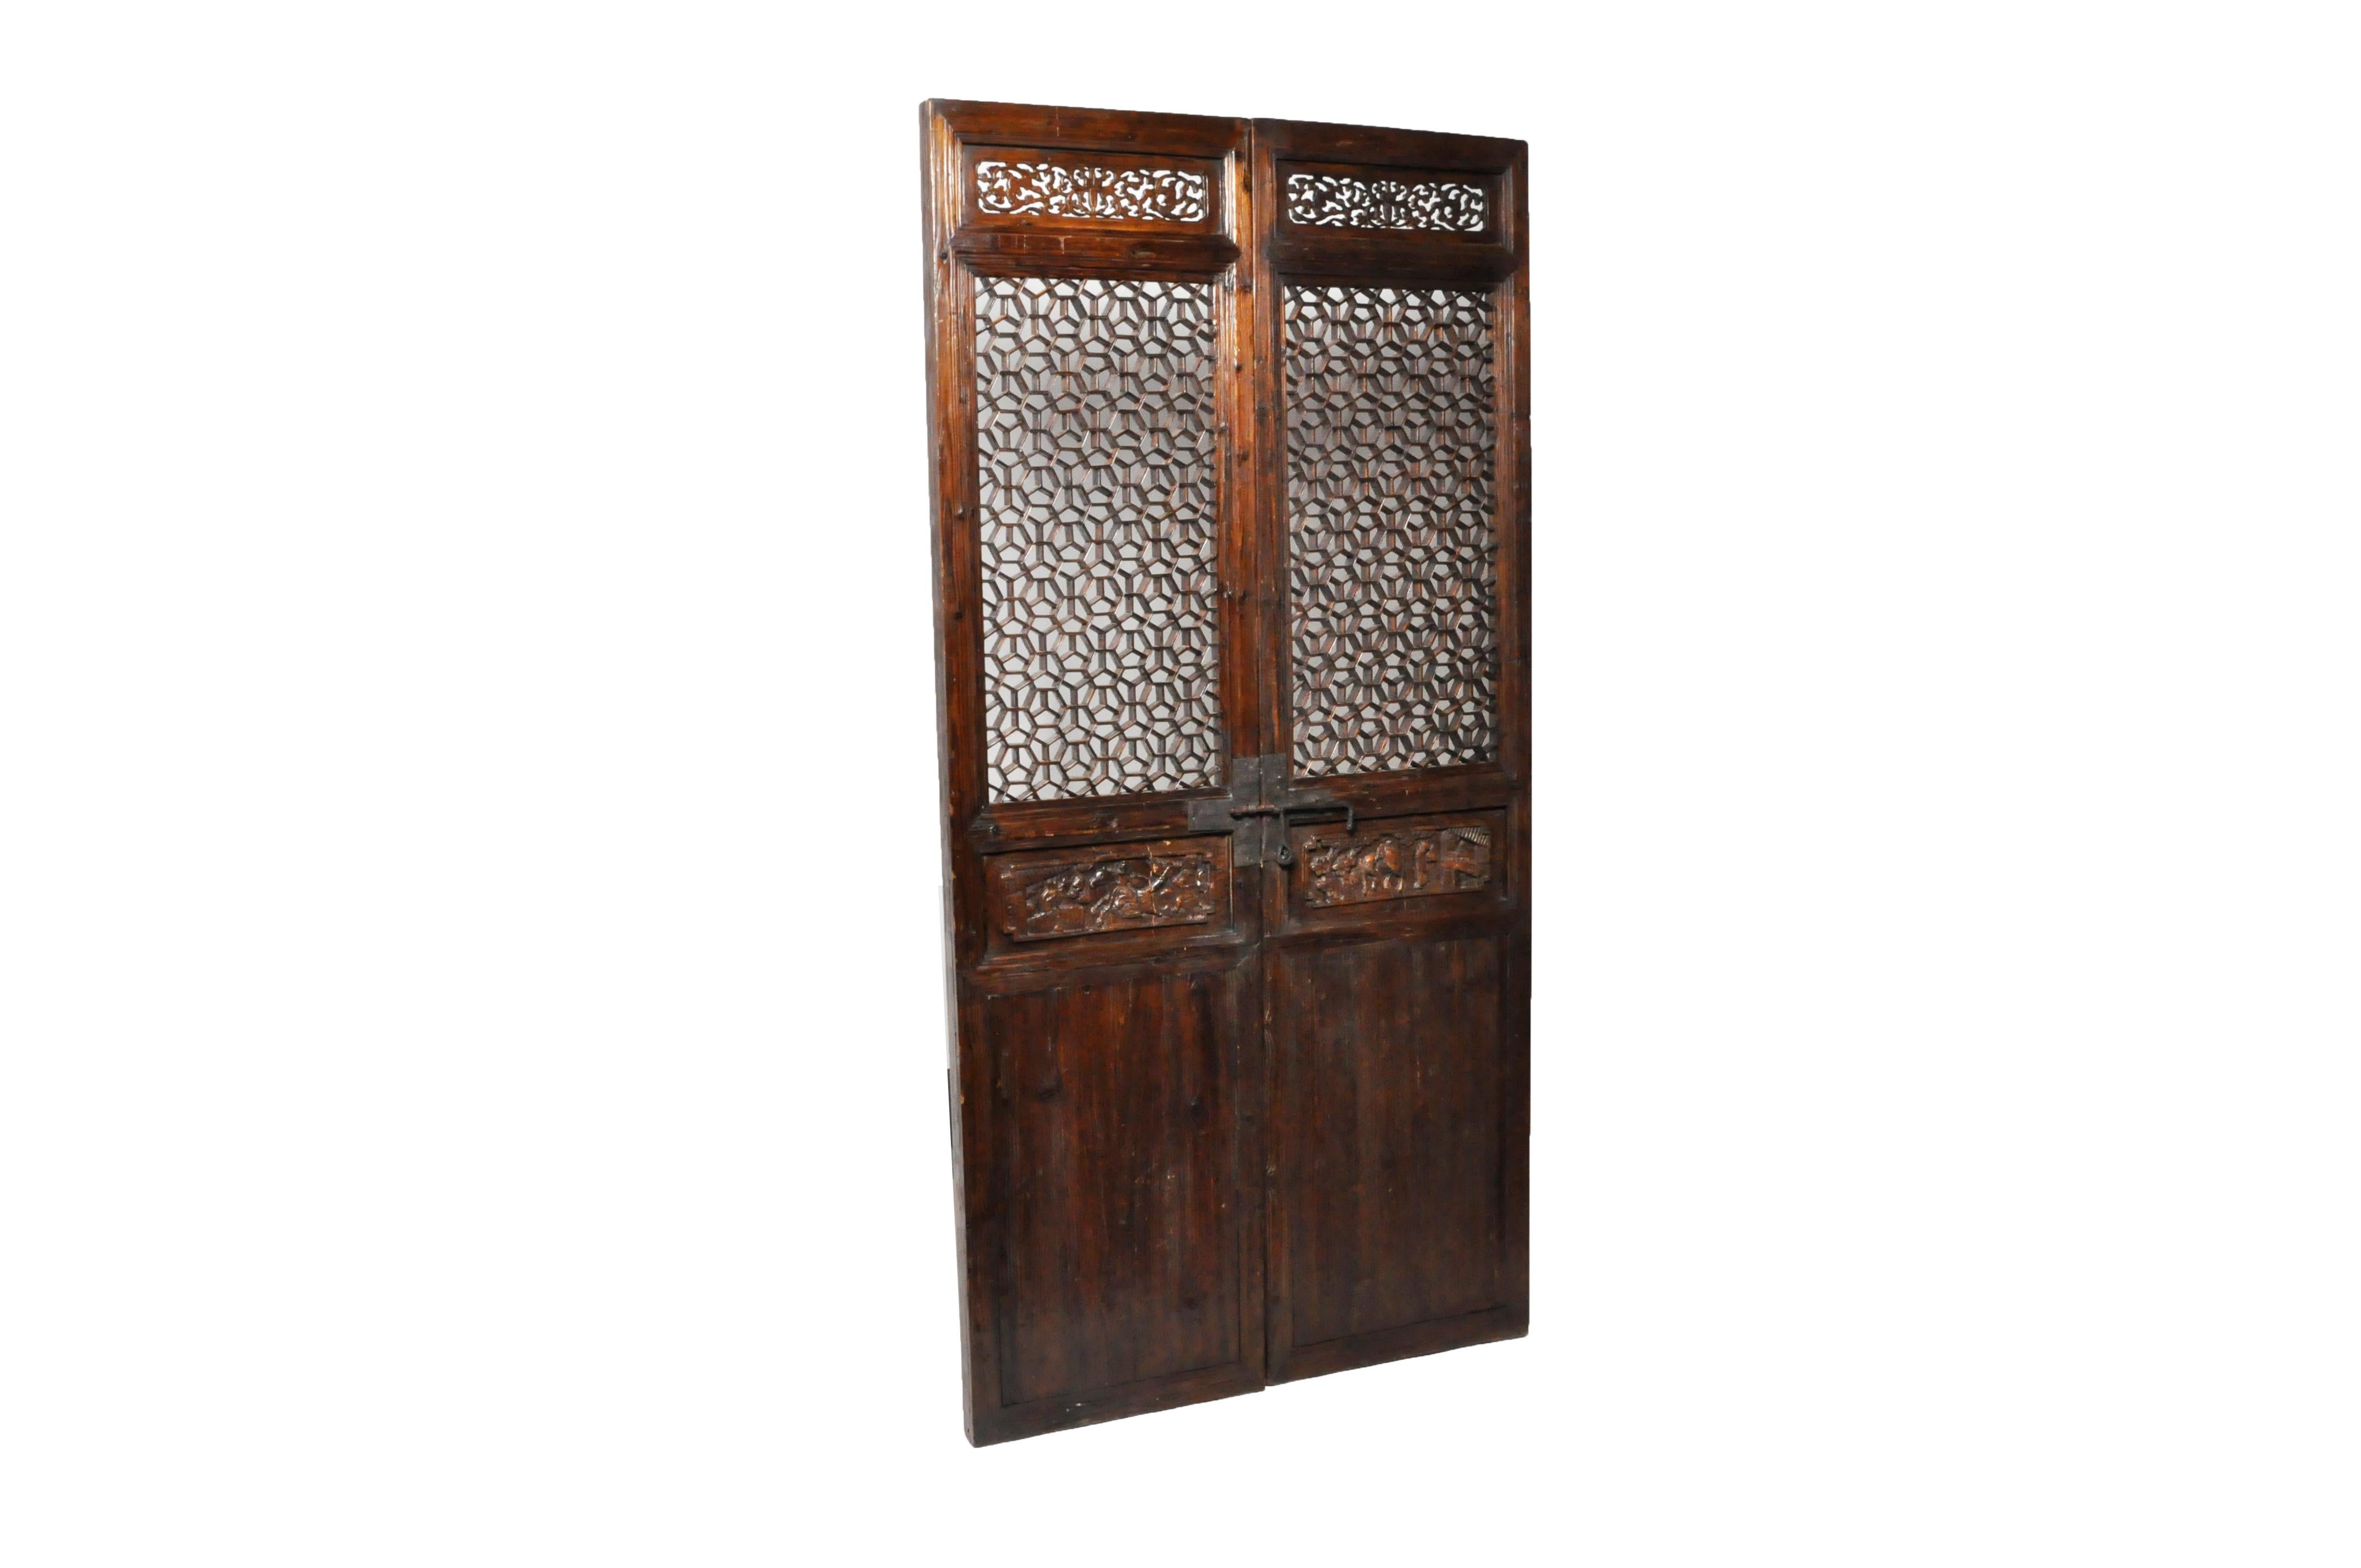 These elegant doors were once part of a large set that surrounded a courtyard in a Northern Chinese house. They feature fine latticework in a honeycomb pattern and carved details depicting courtly life. The deeply weathered and eroded surface of the